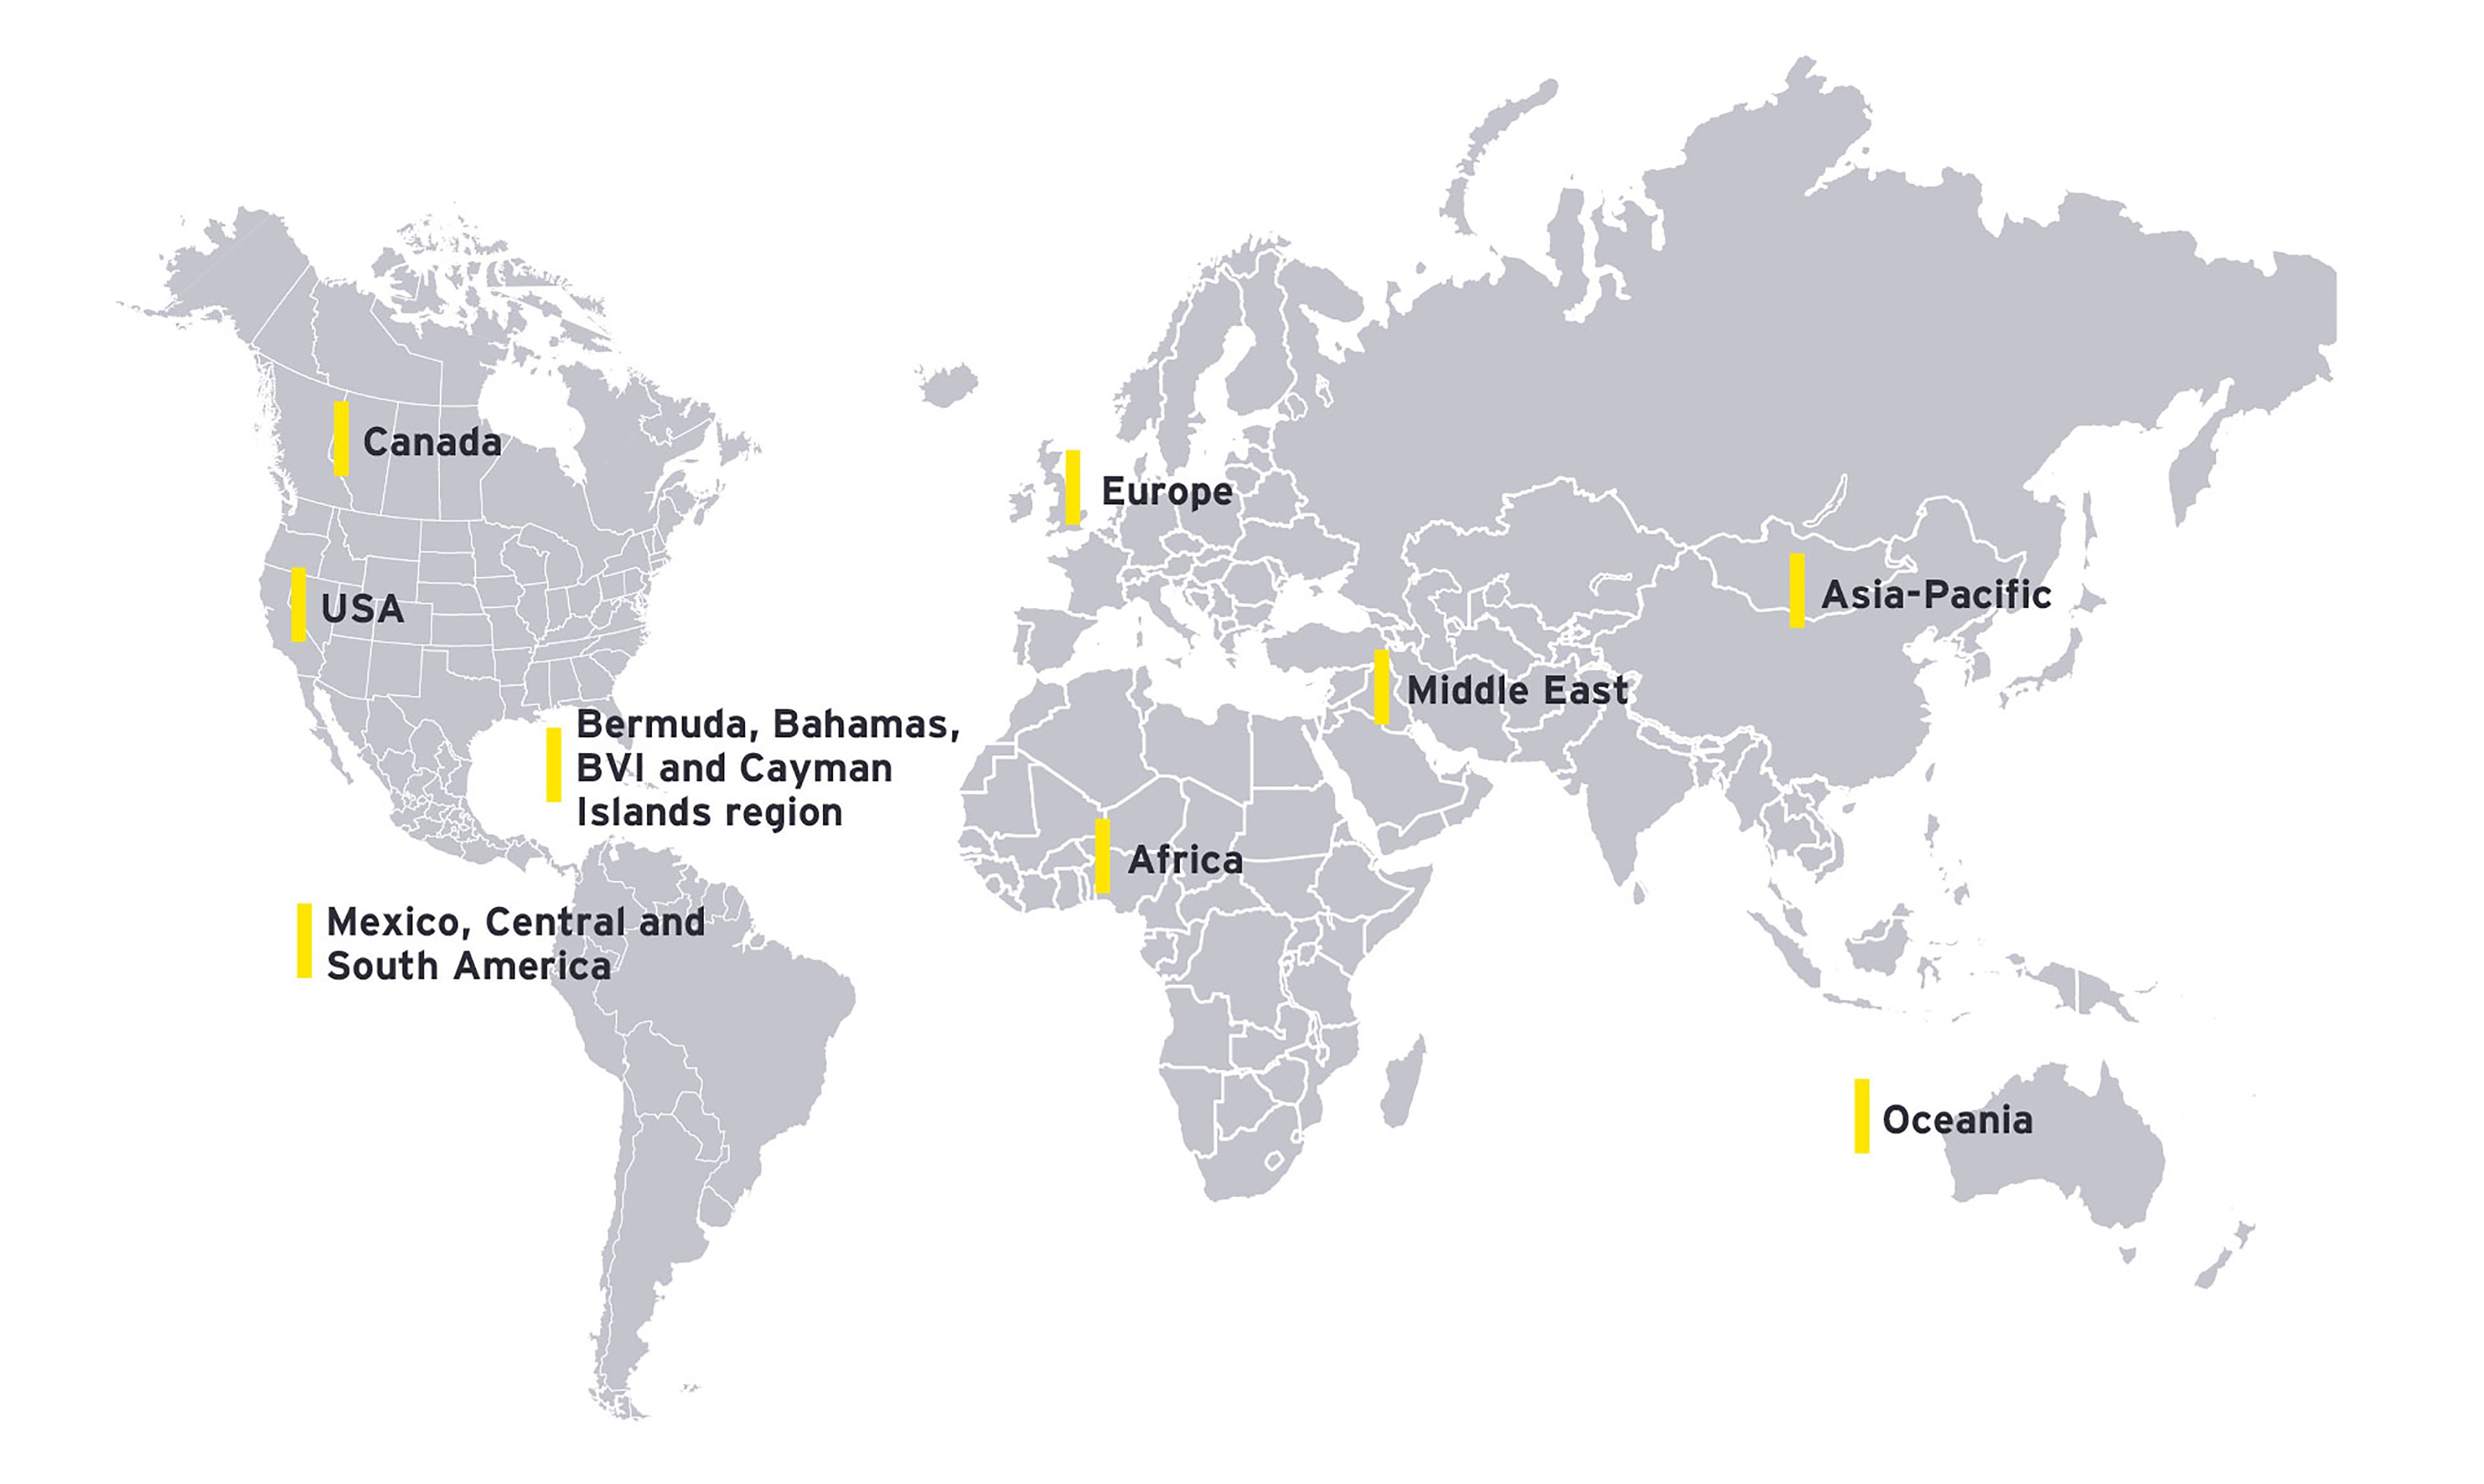 EY - The EY global VME network